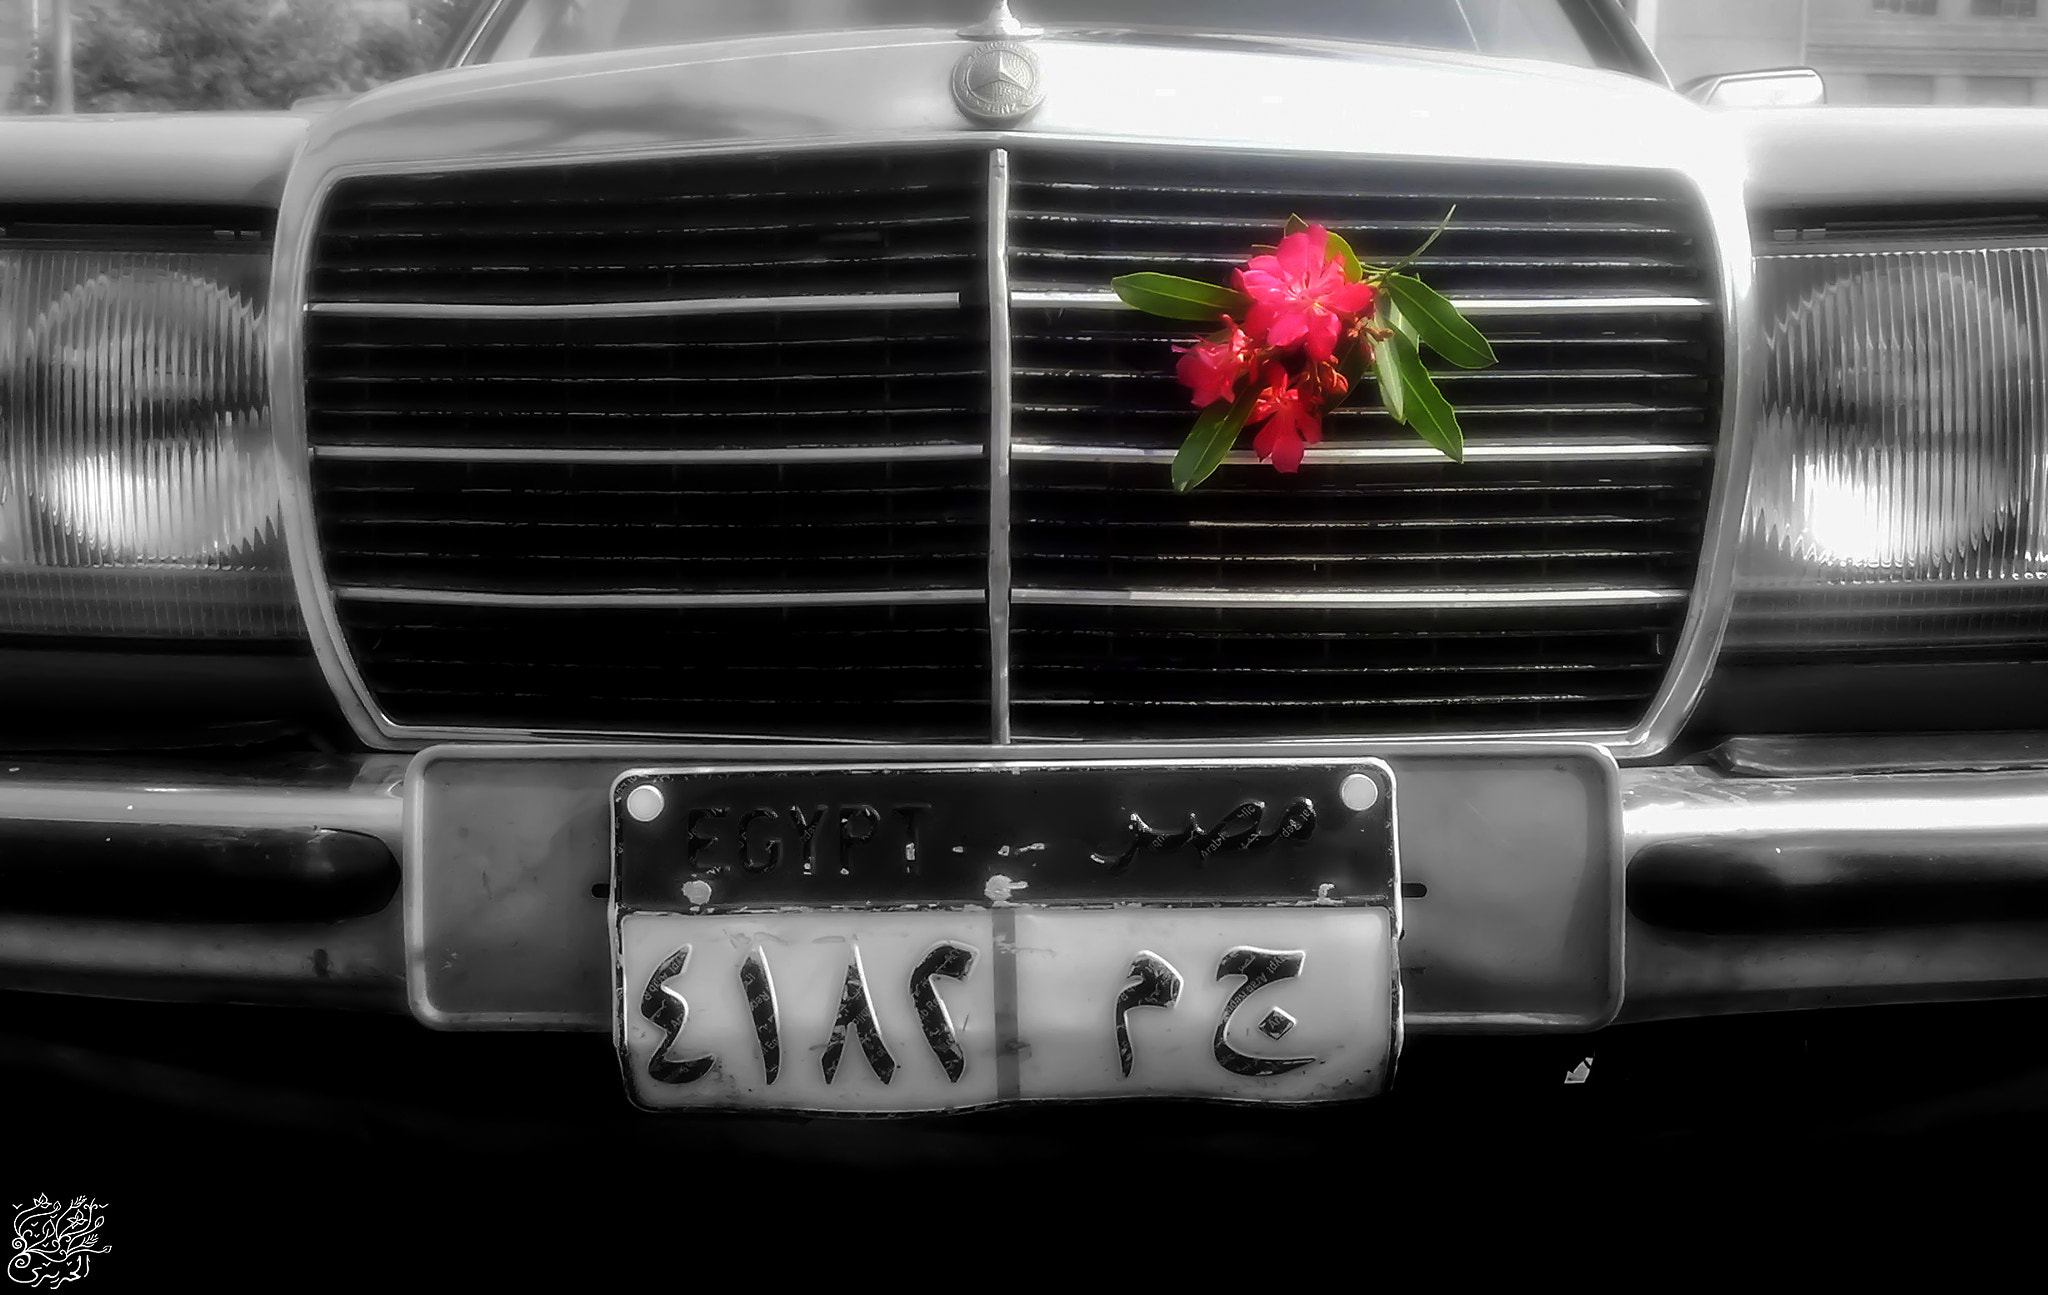 Nokia N97 sample photo. Mercedes and flowers *.* photography